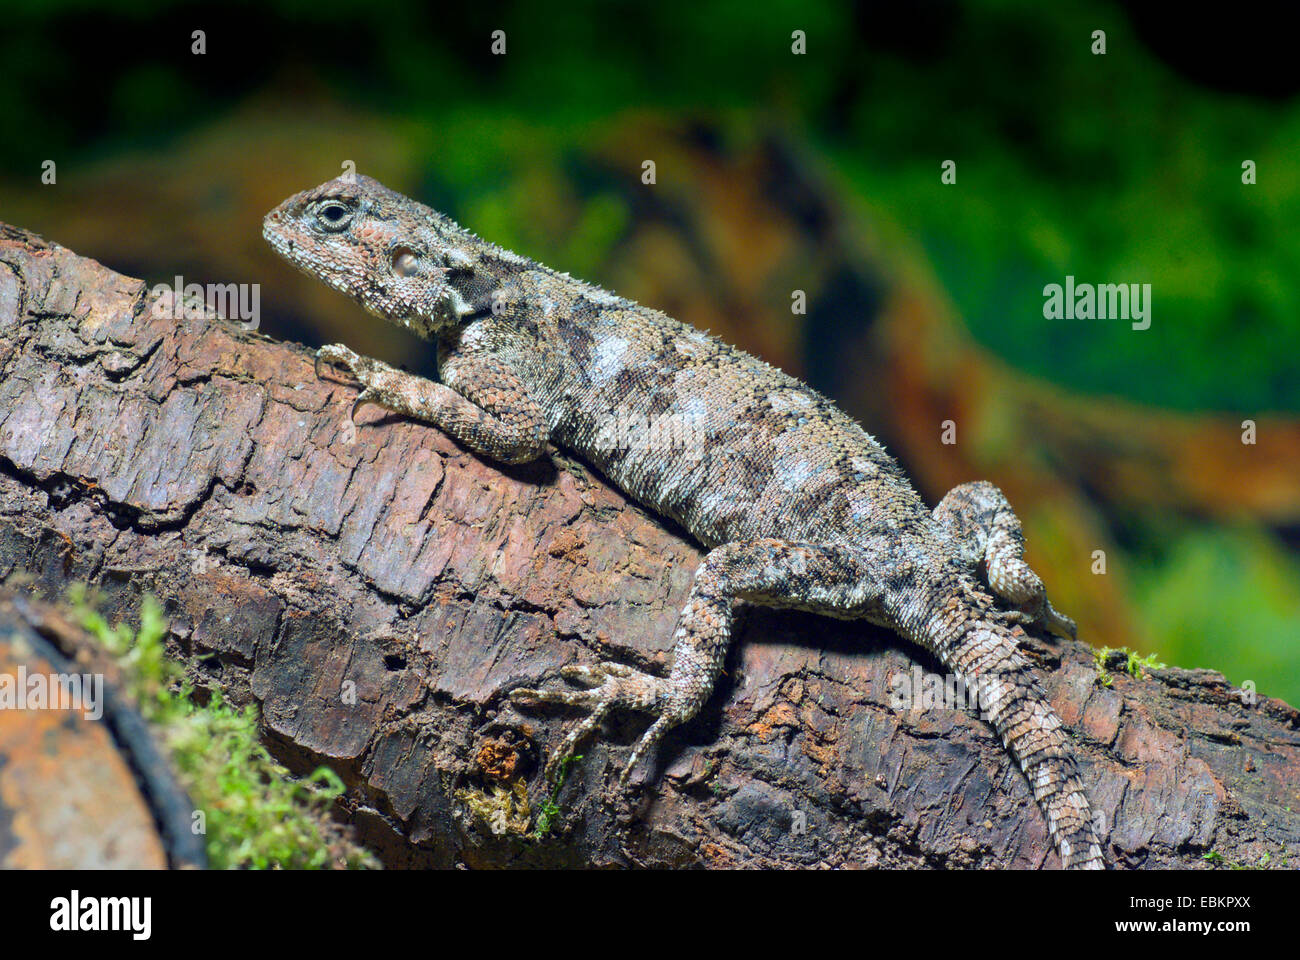 Blue-throated Agama (Acanthocercus atricollis), on a branch Stock Photo